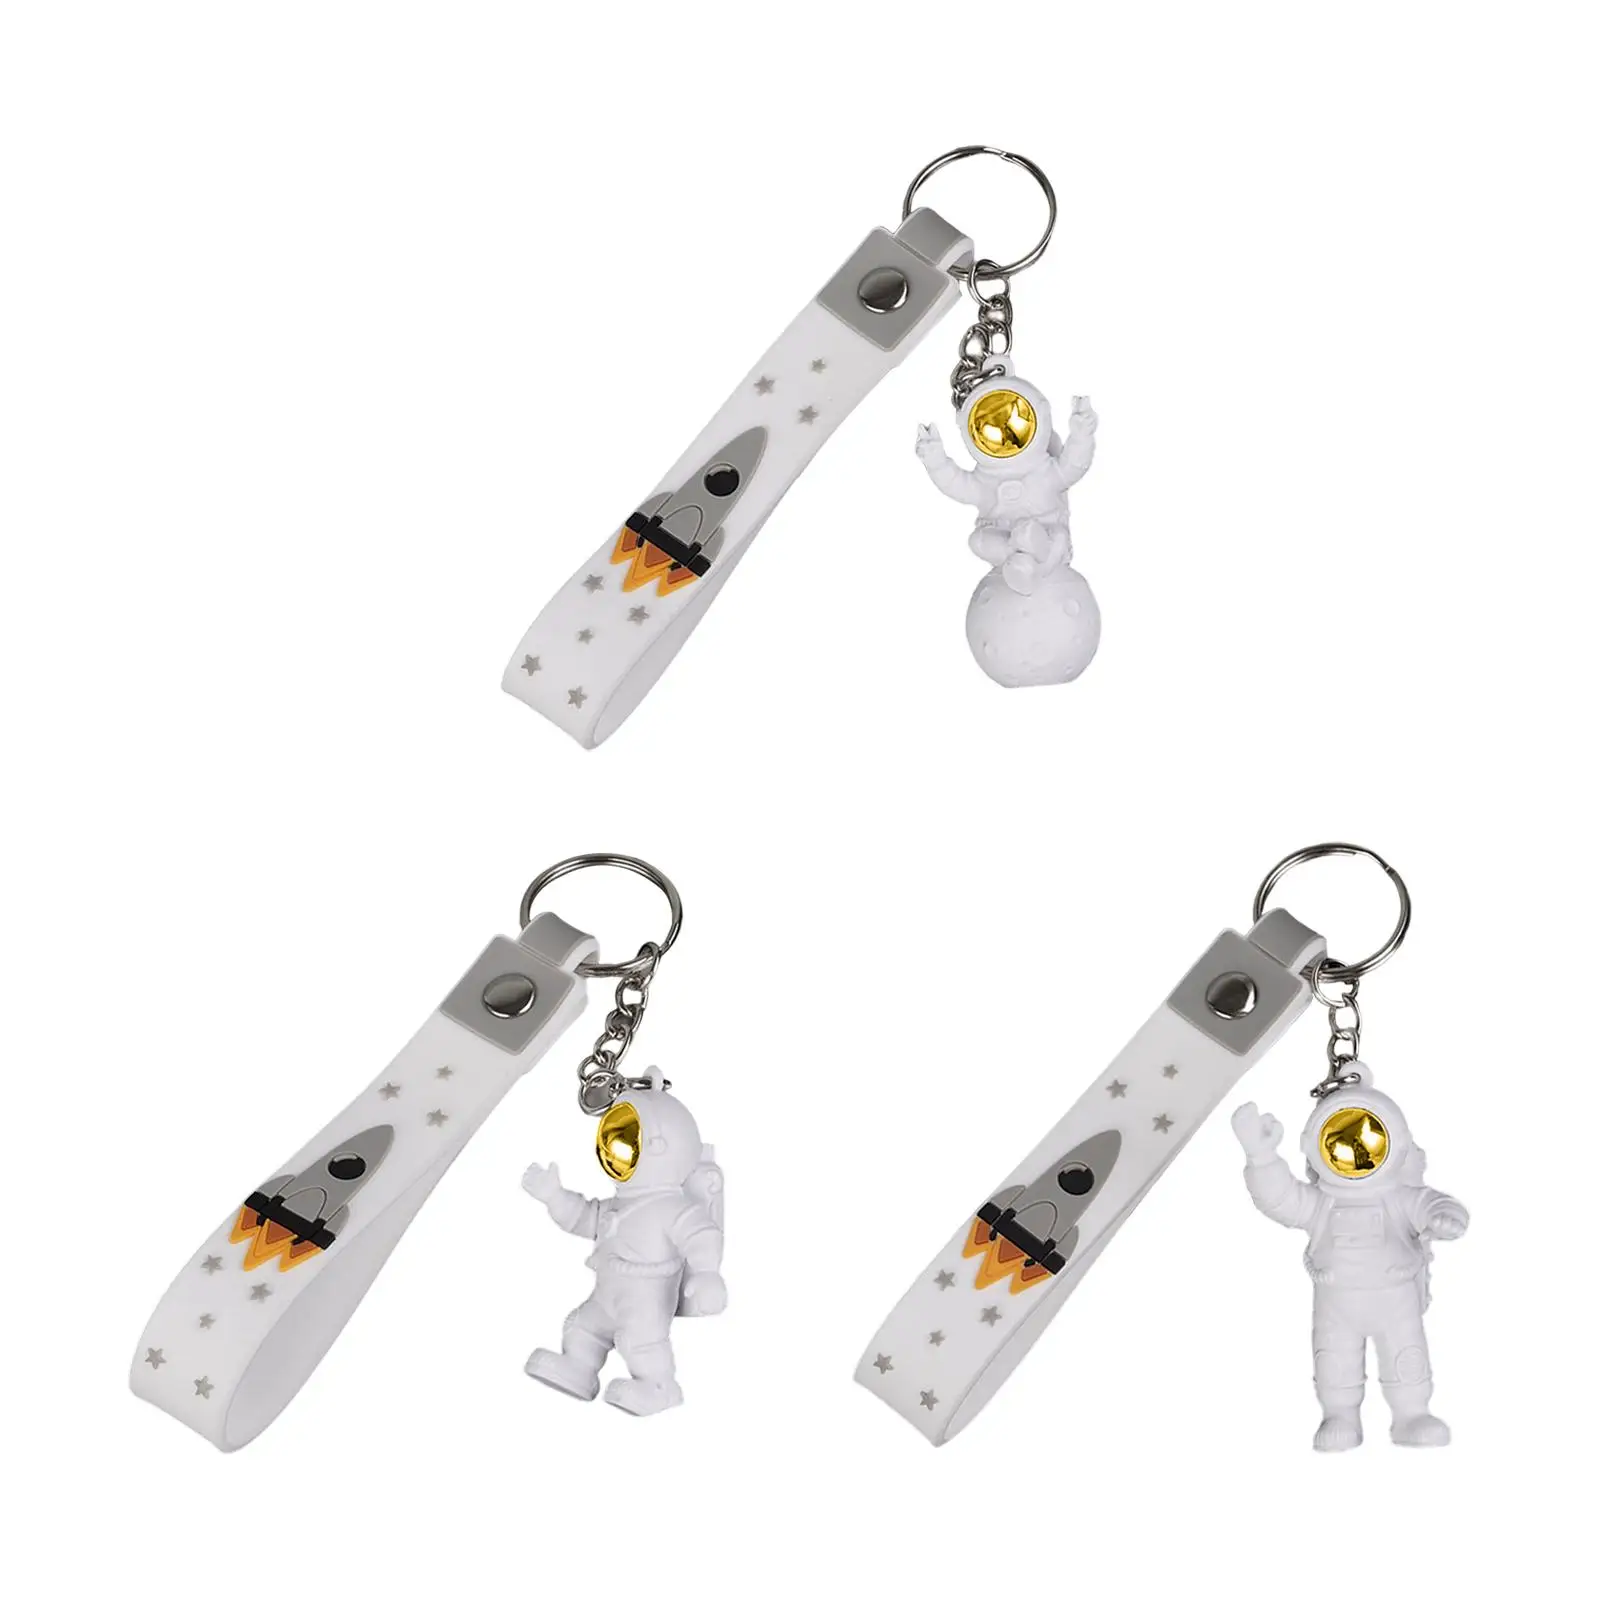 3 Pieces Space Astronaut Keyring Bag Hanging Ornament Car Key Holder Keychain for Gifts Purse Charms Car Wallet Decoration